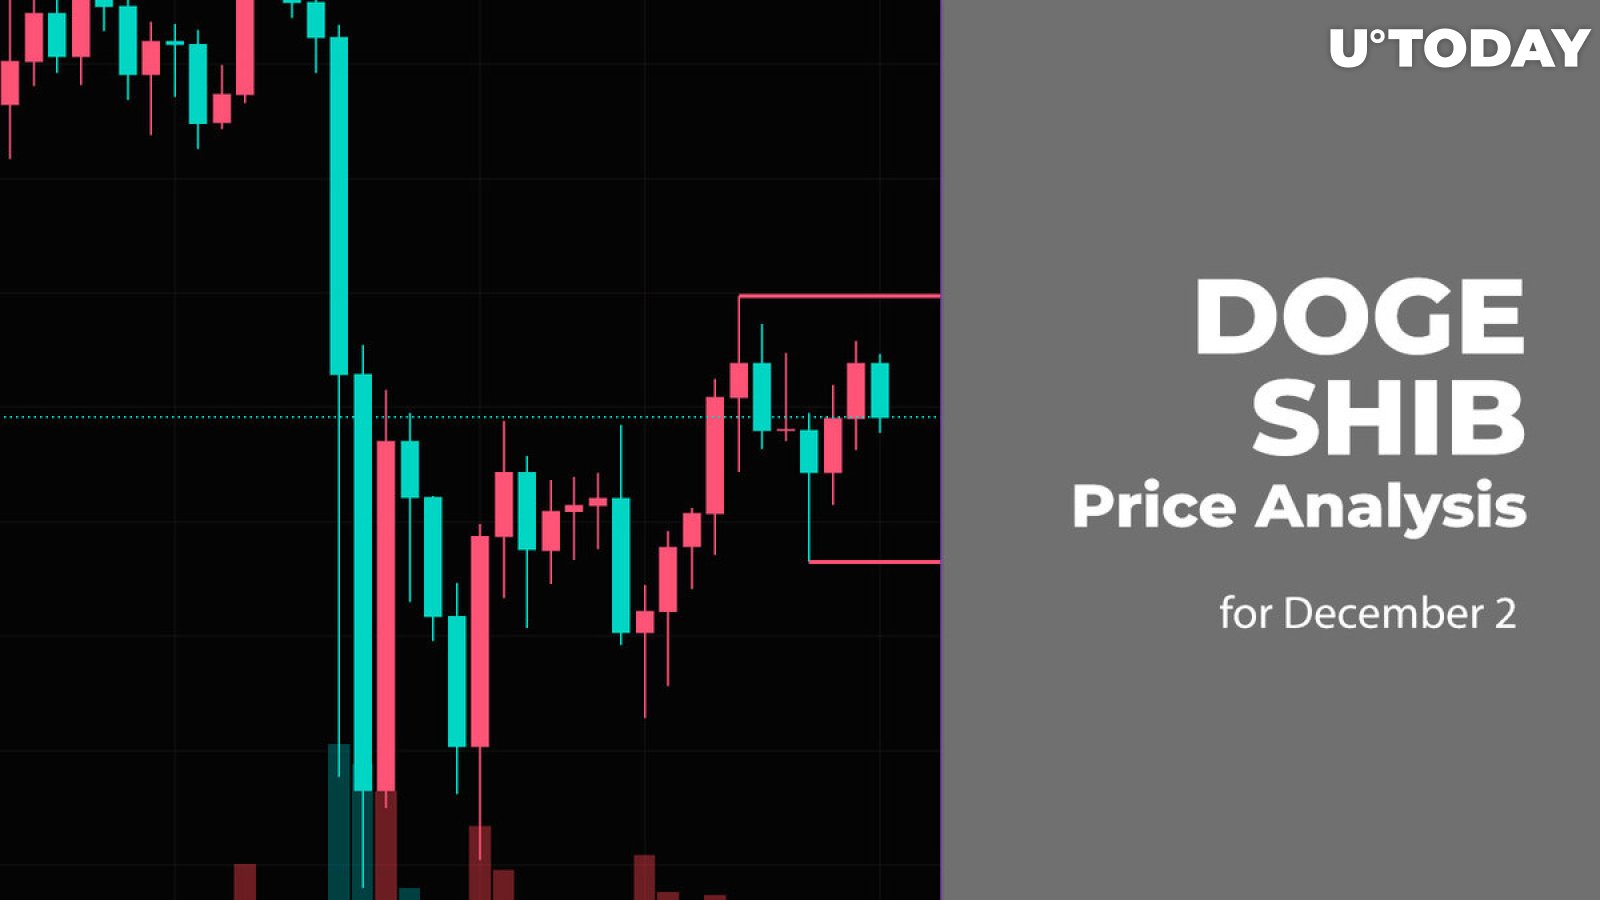 DOGE and SHIB Price Analysis for December 2